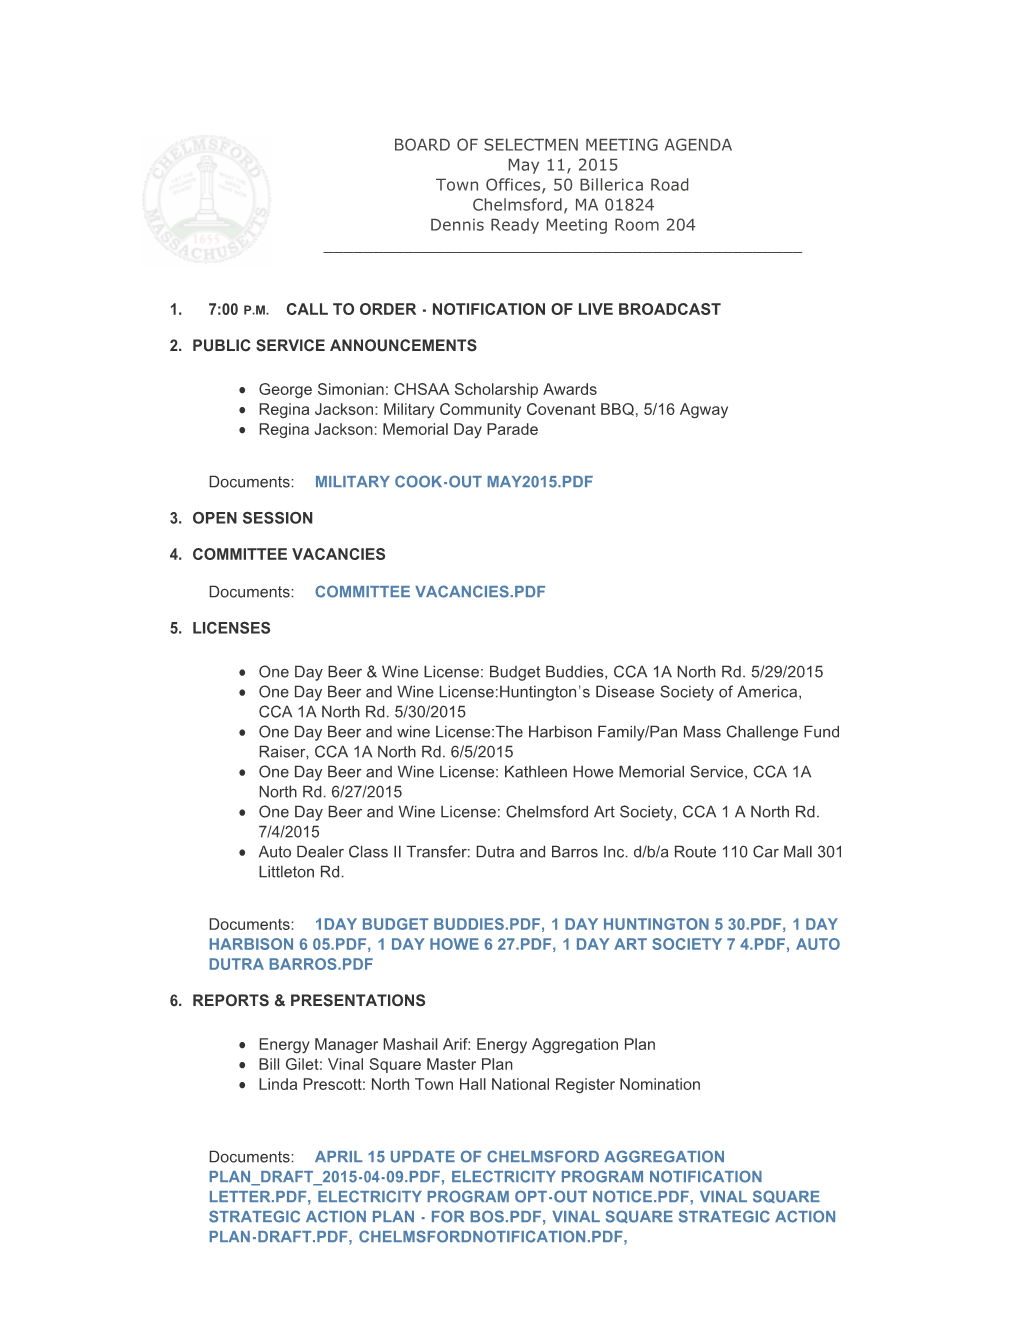 BOARD of SELECTMEN MEETING AGENDA May 11, 2015 Town Offices, 50 Billerica Road Chelmsford, MA 01824 Dennis Ready Meeting Room 204 ______